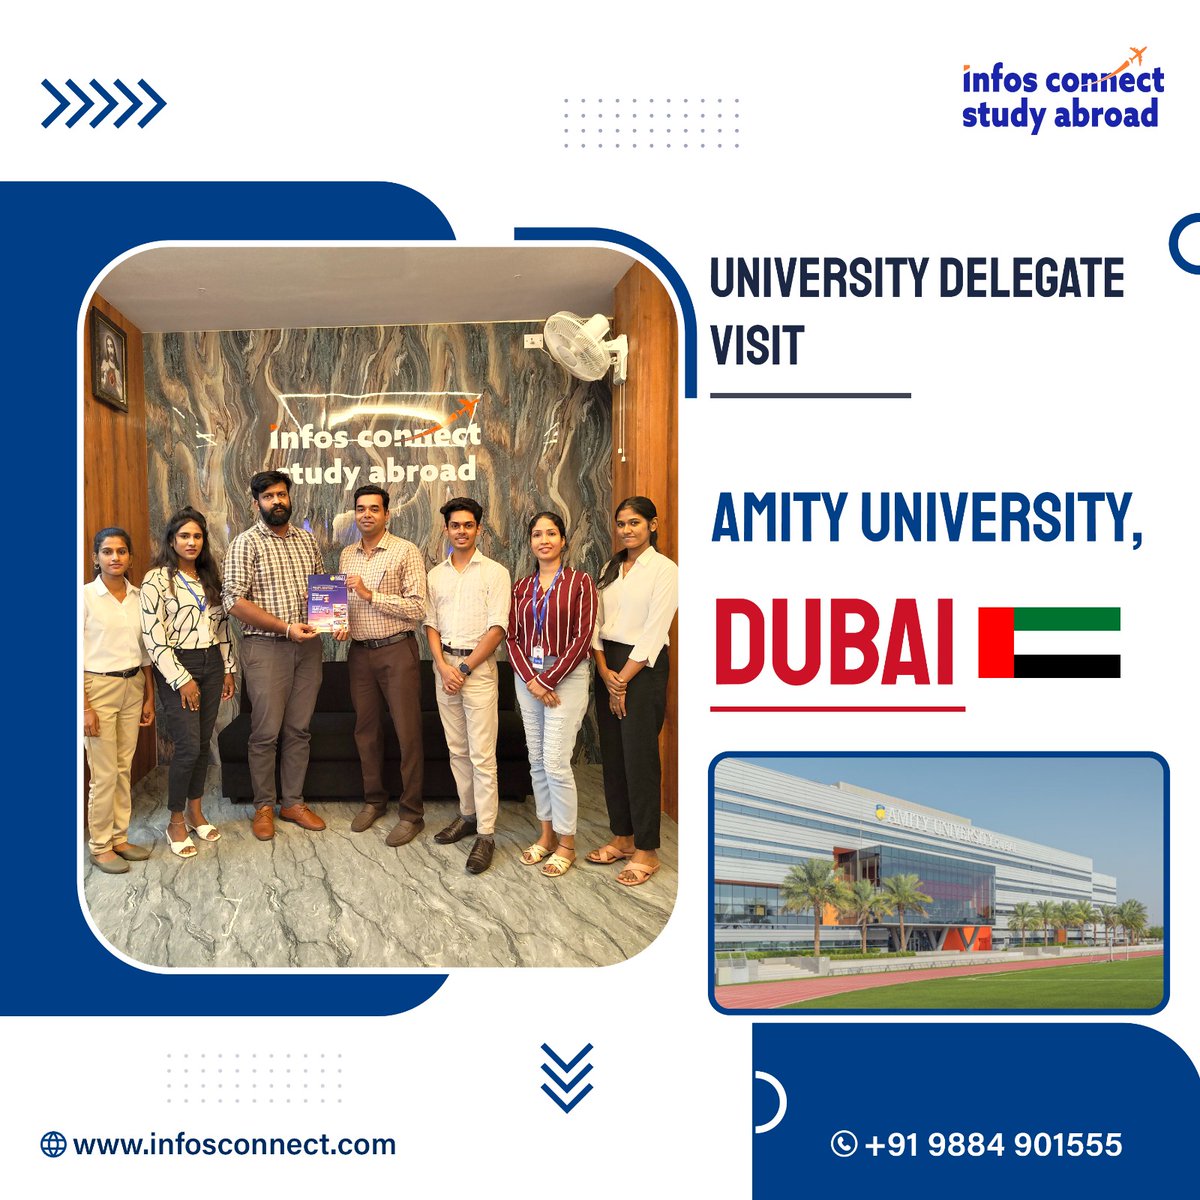 Infos Connect Study Abroad - one of the best overseas education consultancy in Kochi welcomed delegate from Amity University
+91 98849 01555
infosconnect.com
#studyabraod #abroadeducation #usaStudentVisa #highereducation #studyoverseas #university #uae